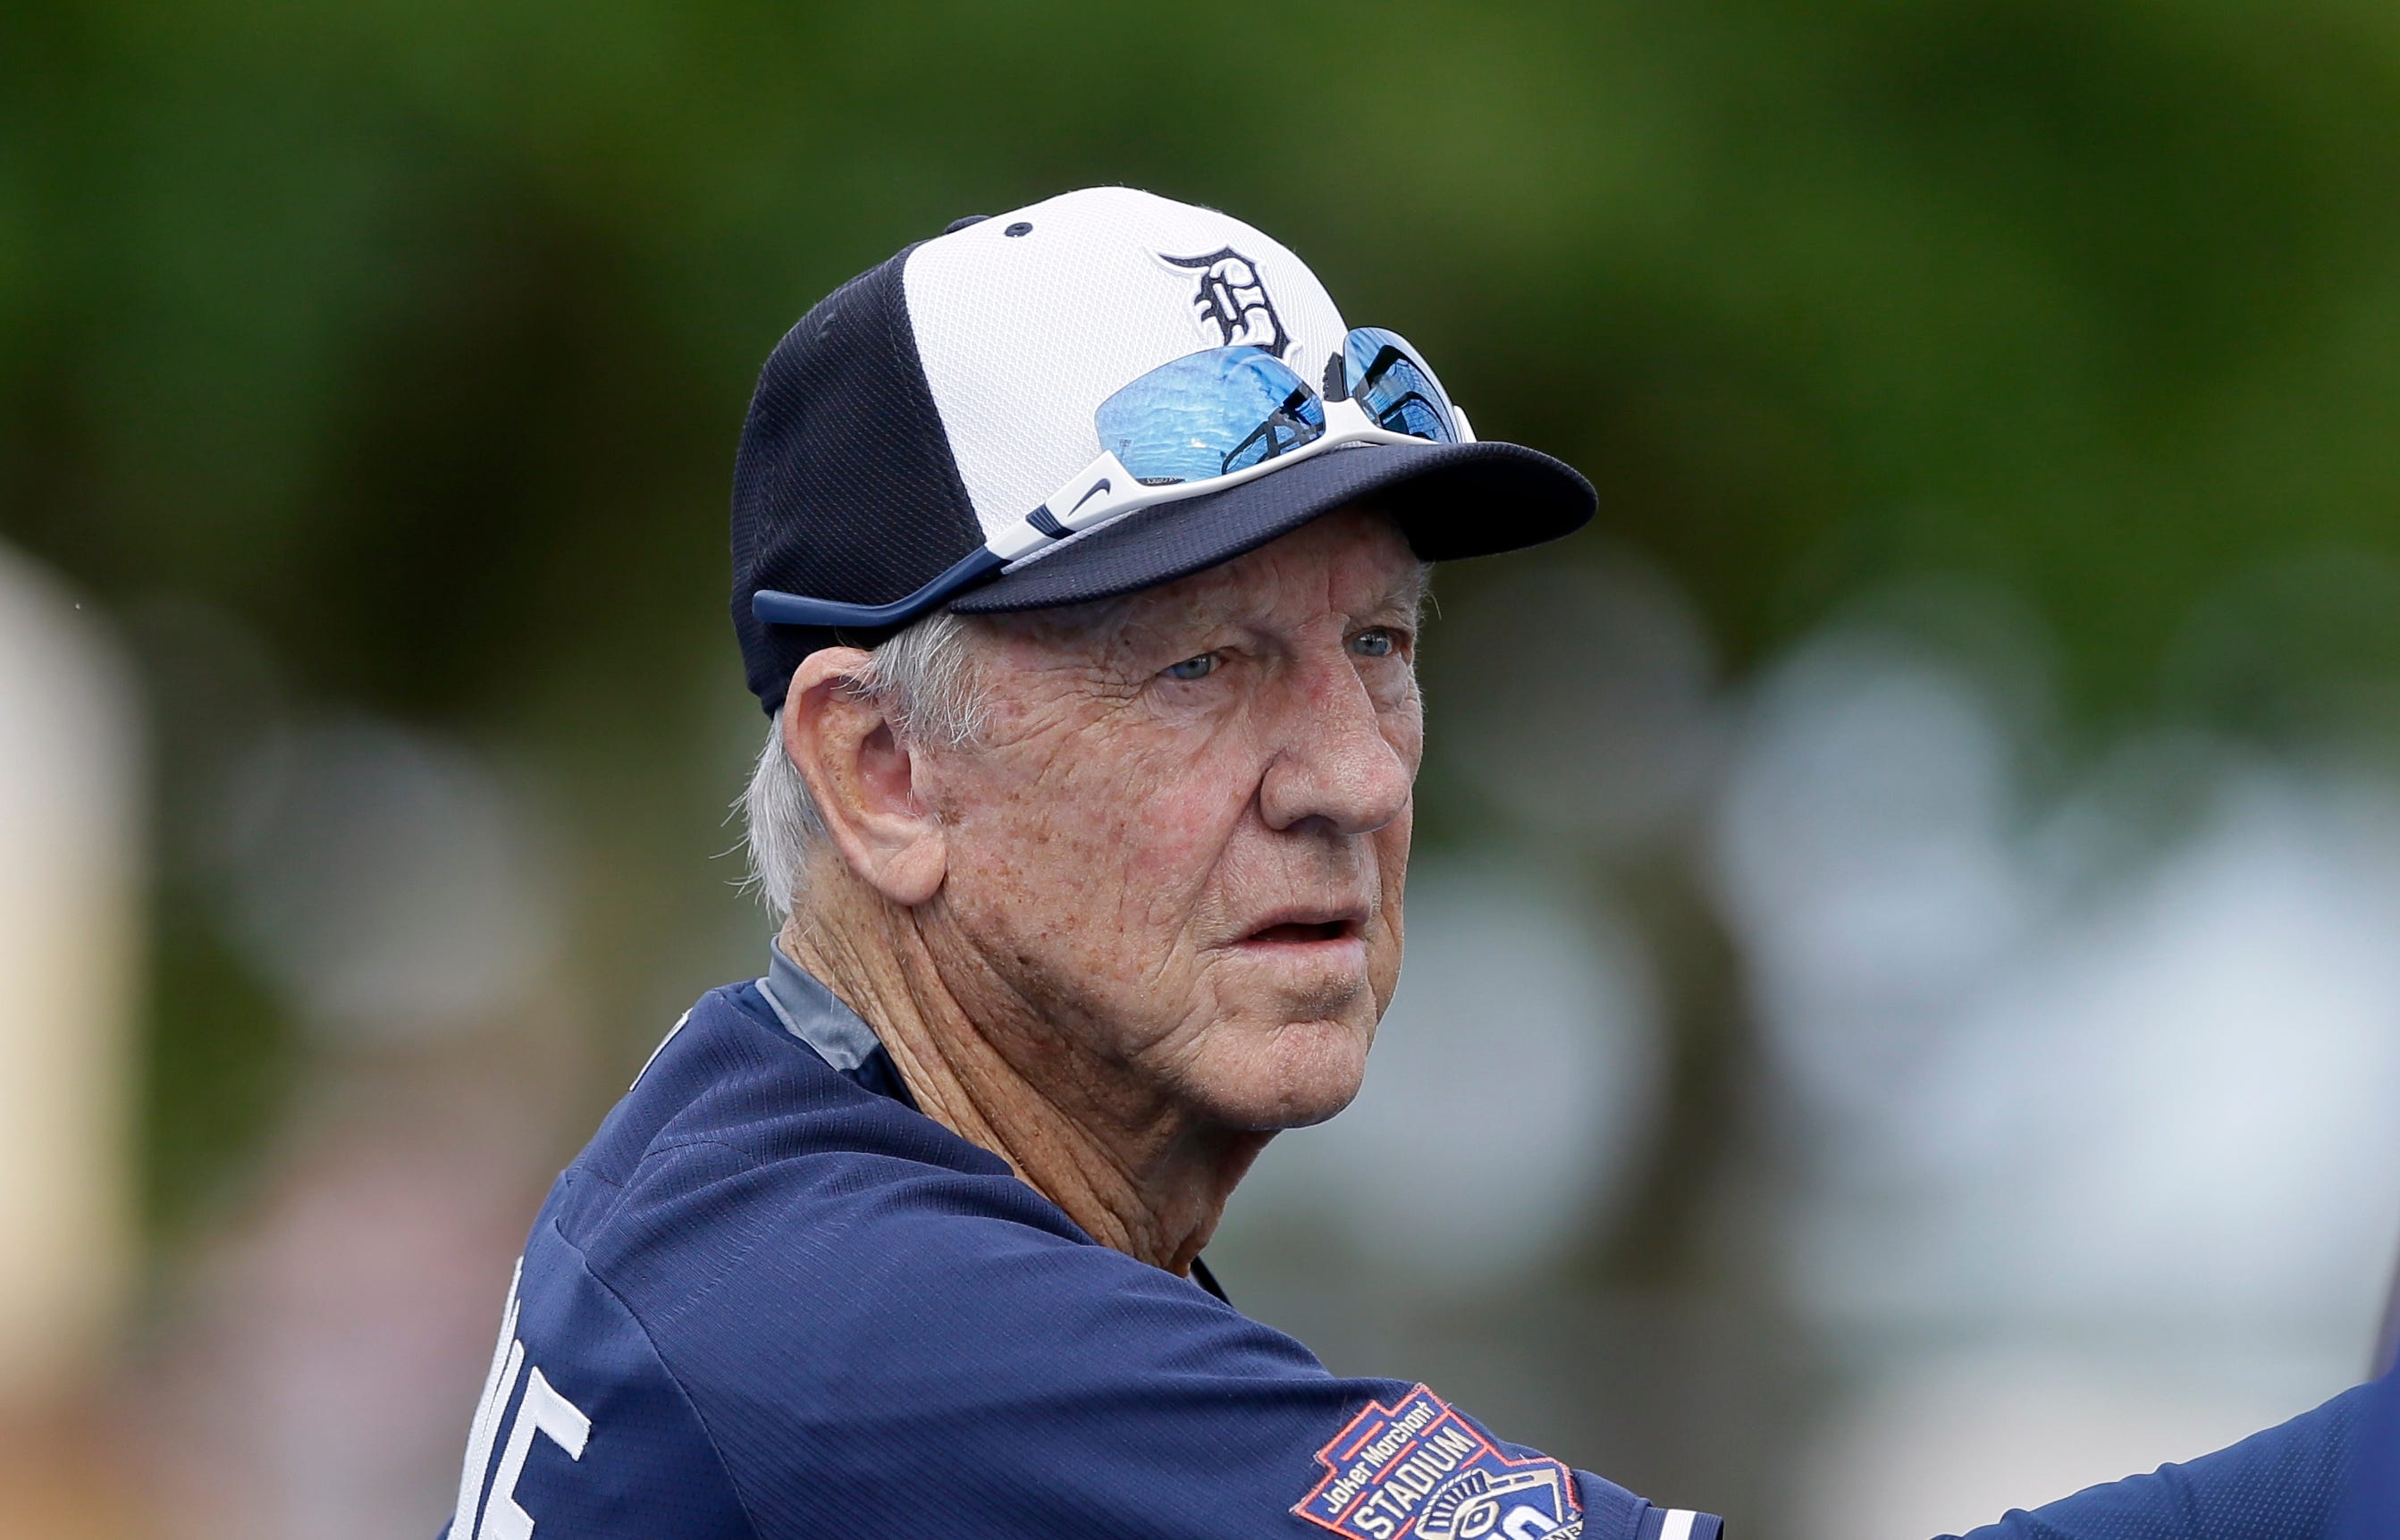 Detroit Tigers' Hall of Famer Al Kaline is seen during pre-game warmups of a spring training exhibition baseball game against the Toronto Blue Jays in Lakeland, Florida, Monday, March 9, 2015.